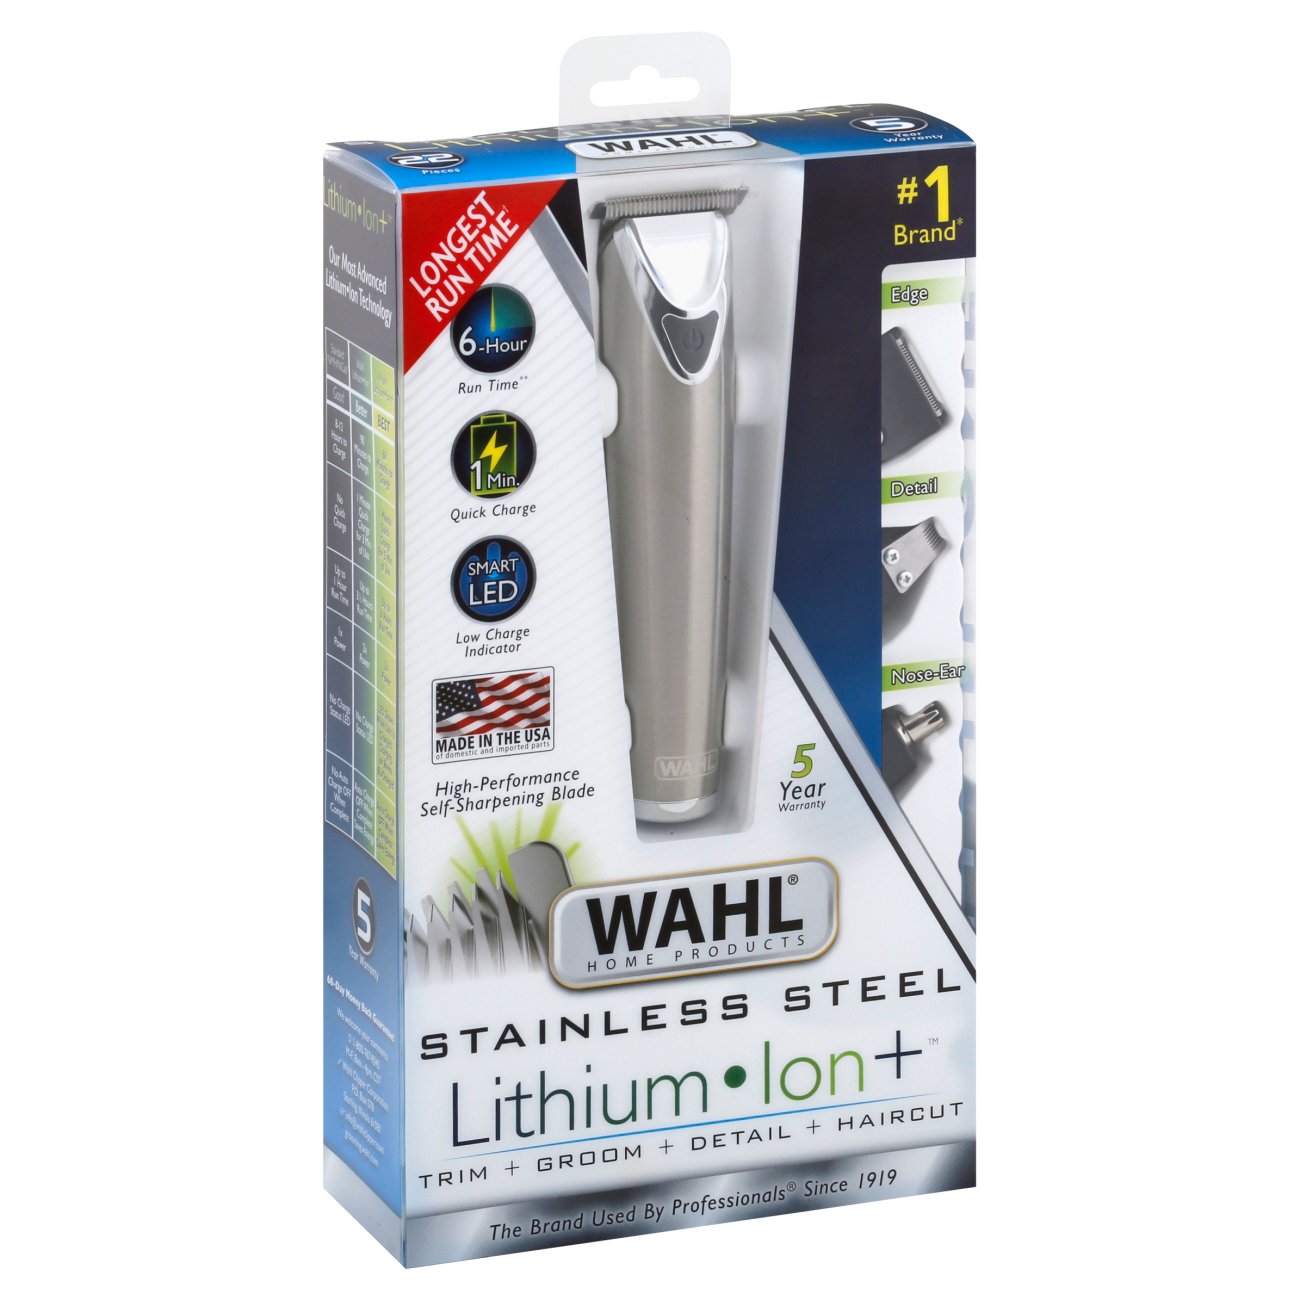 Wahl Stainless Lithium-Ion+ - Shop Electric Shavers & Trimmers at H-E-B